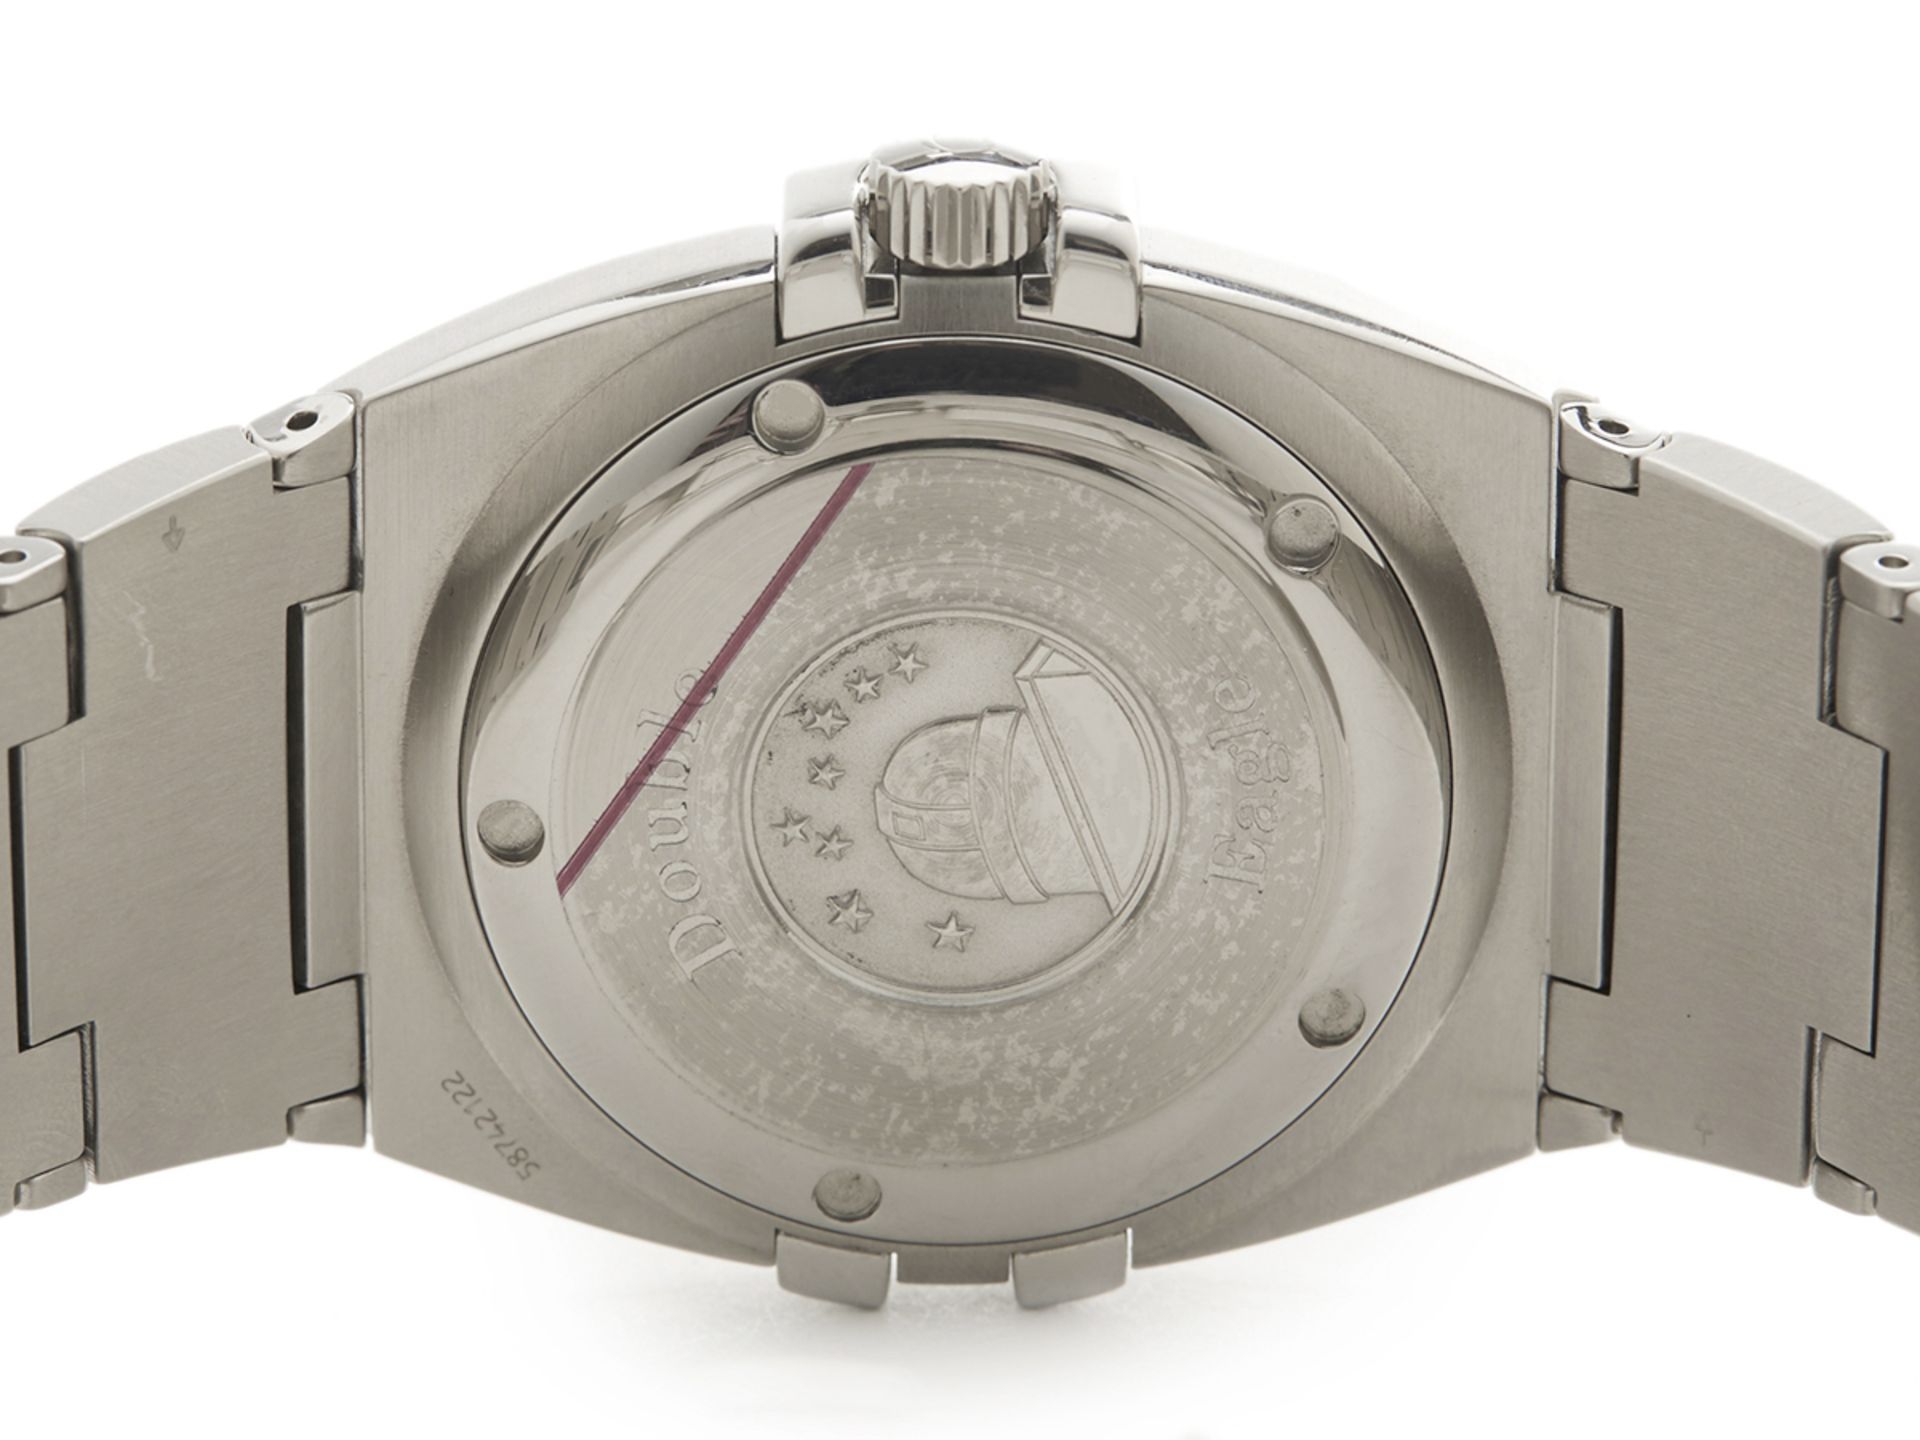 Omega Constellation Double Eagle 40mm Stainless Steel 1513.51.00 - Image 9 of 10